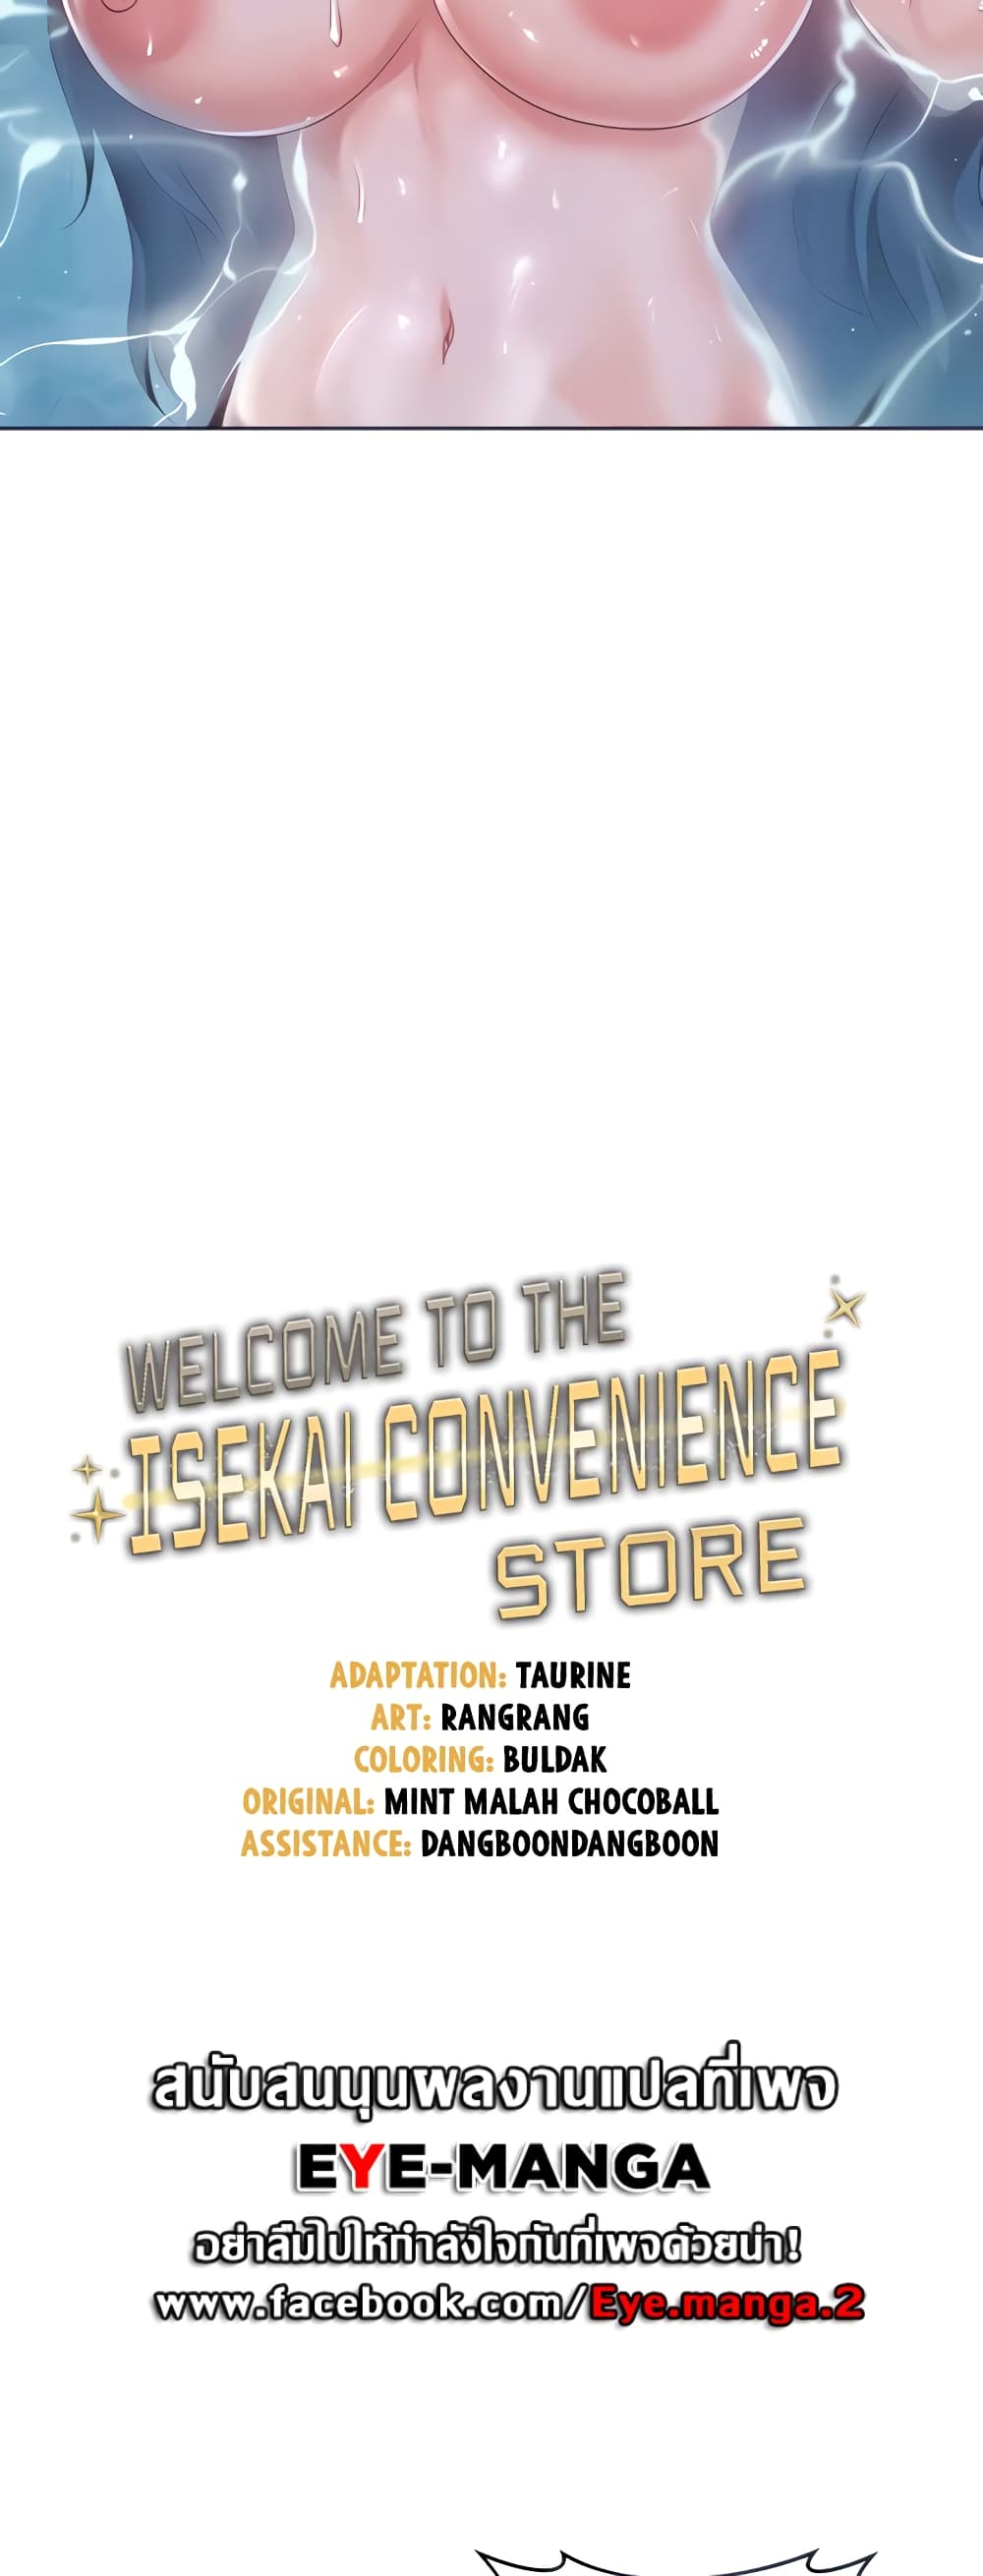 Welcome to the Isekai Convenience Store 8-8